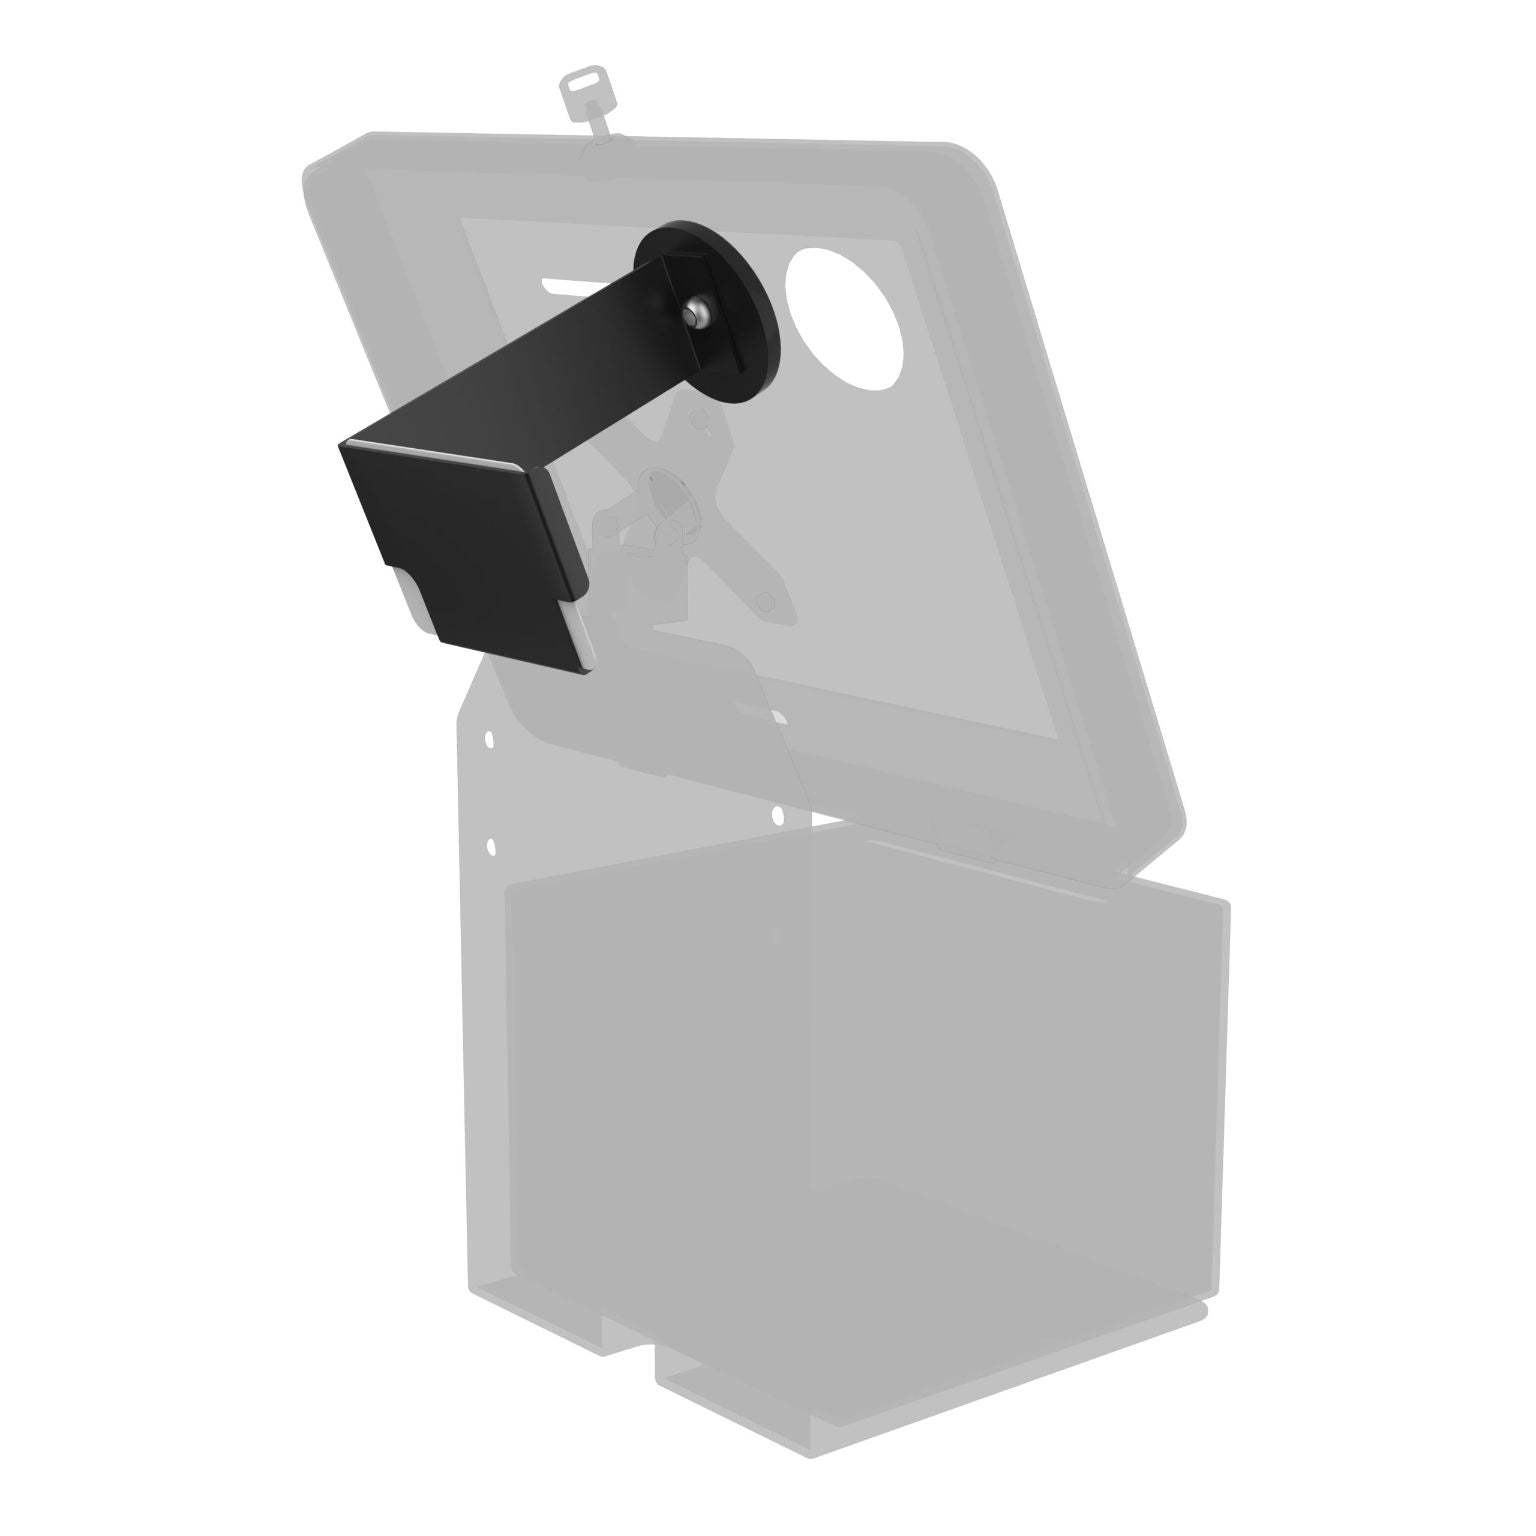 ID and Card Holder with Magnetic Attachment for Card Scanning